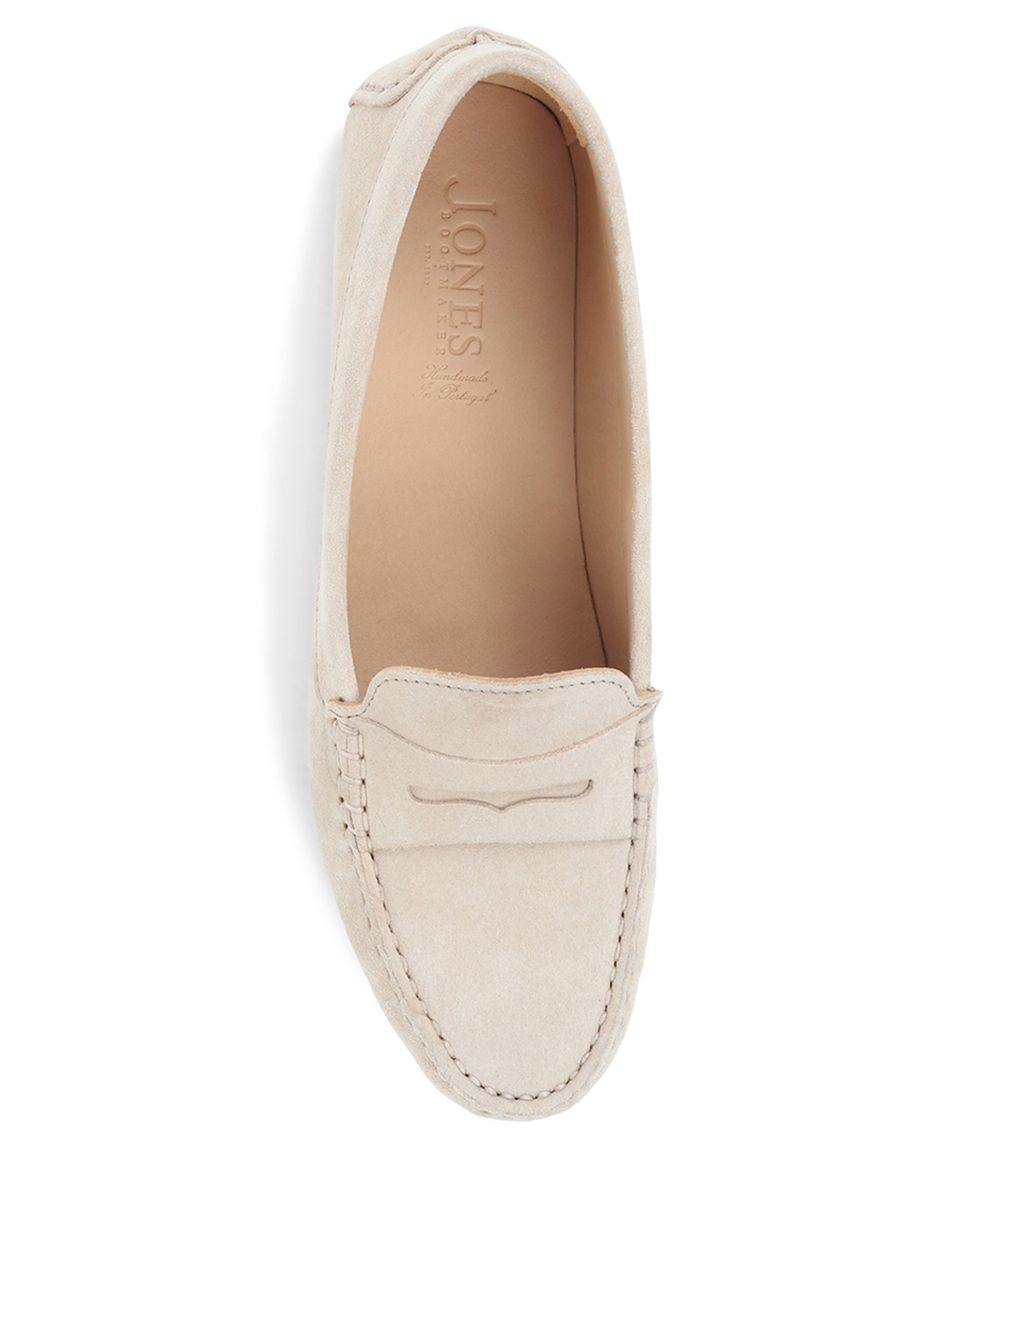 Suede Slip On Loafers image 4